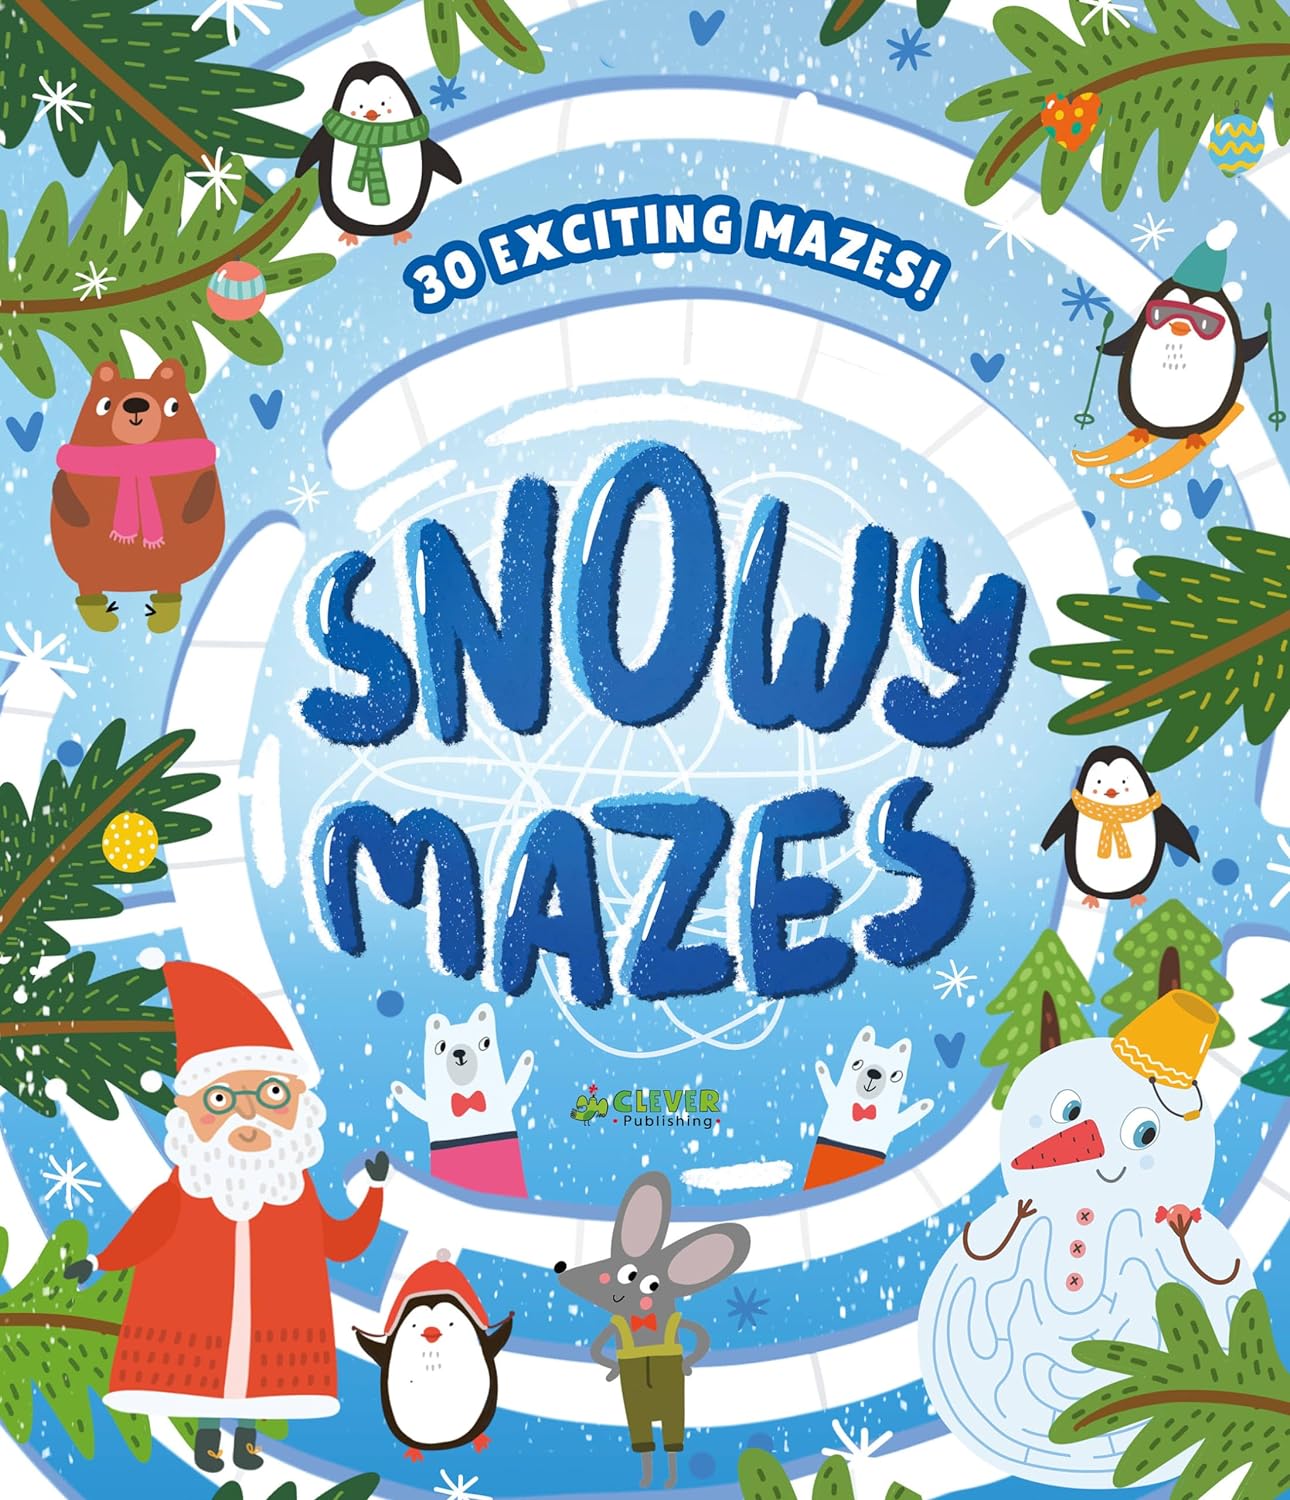 Snowy Mazes book by Clever Publishing.